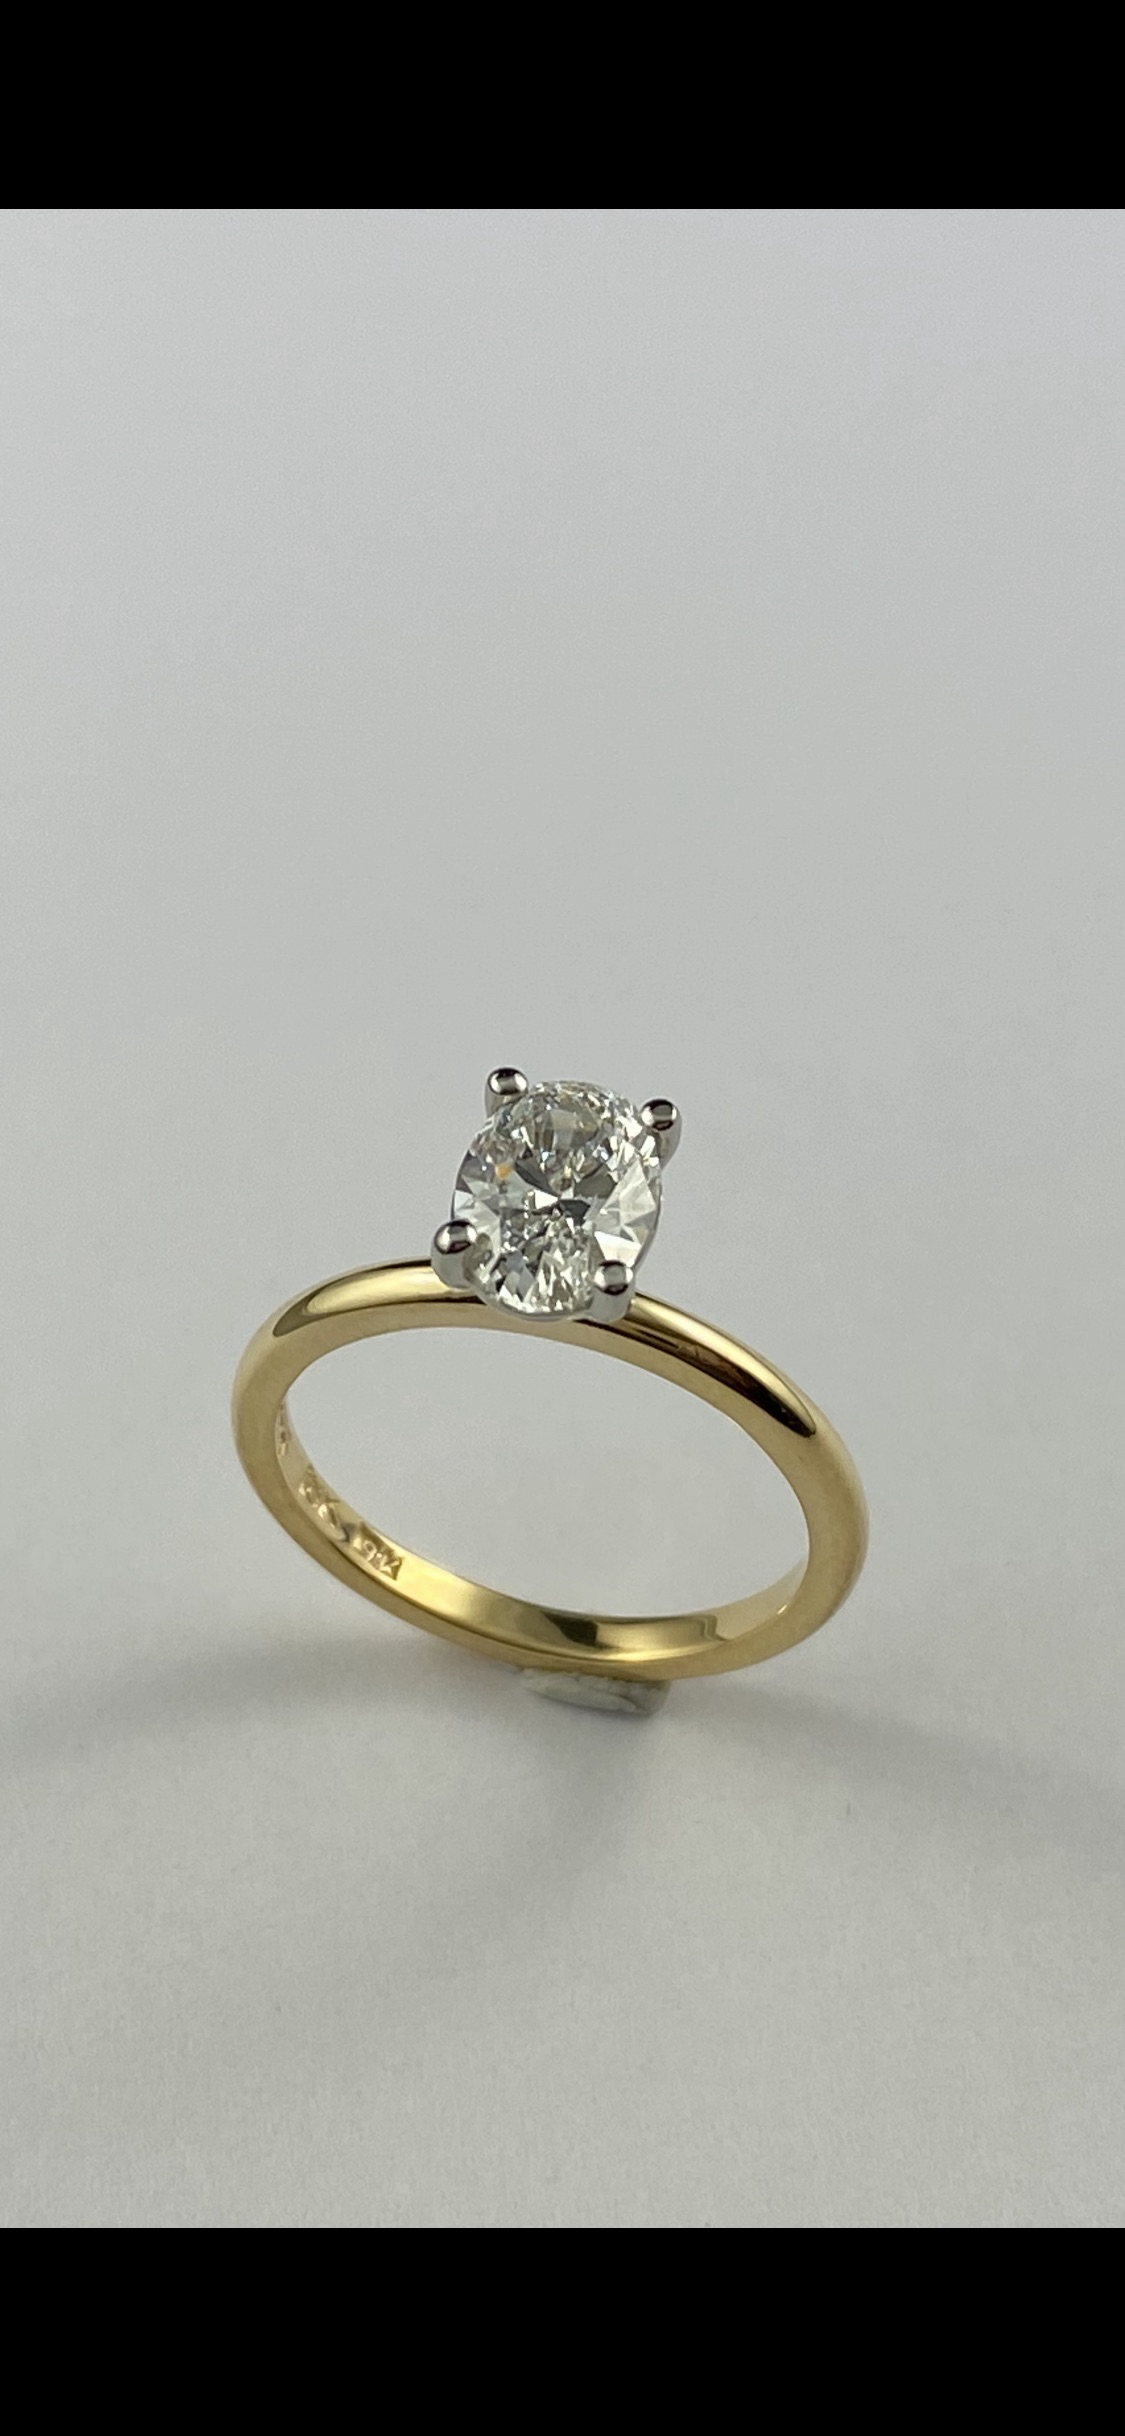 19K White and 18K Yellow Gold Oval Brilliant Cut Diamond Solitaire